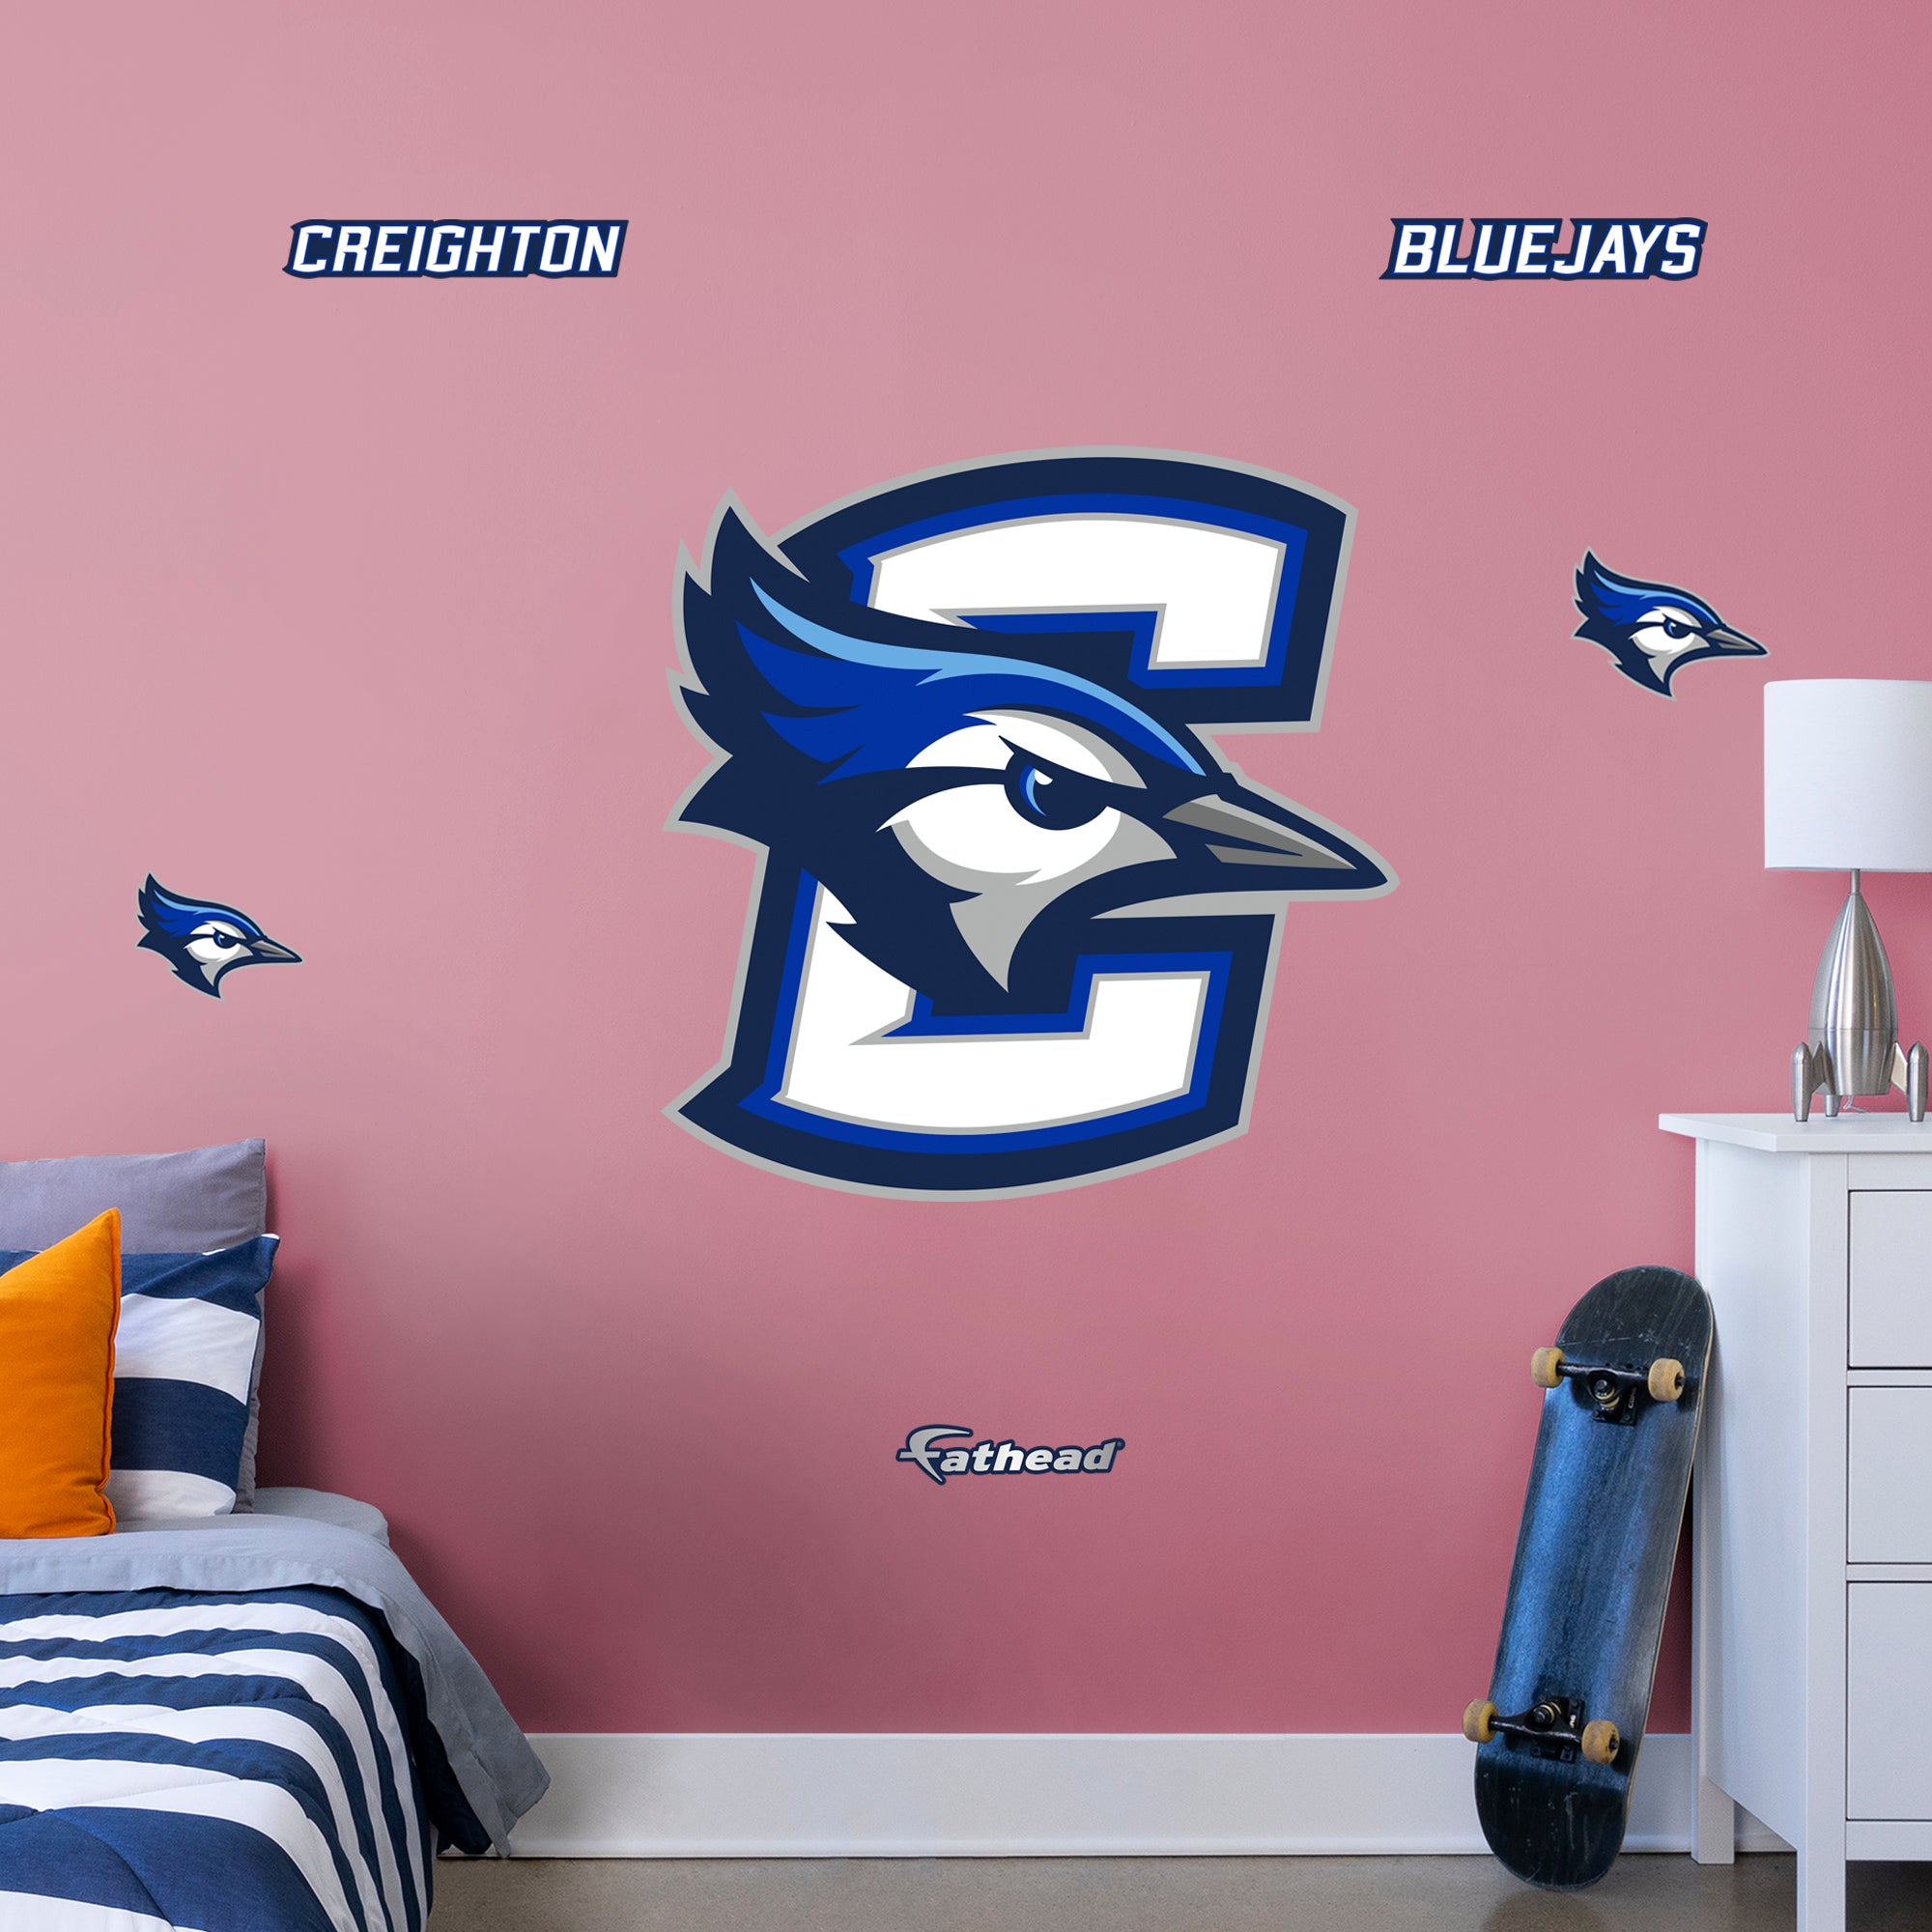 Creighton Blue Jays 2020 RealBig Logo - Officially Licensed NCAA Removable Wall Decal Giant Decal (36"W x 36"H) by Fathead | Vin